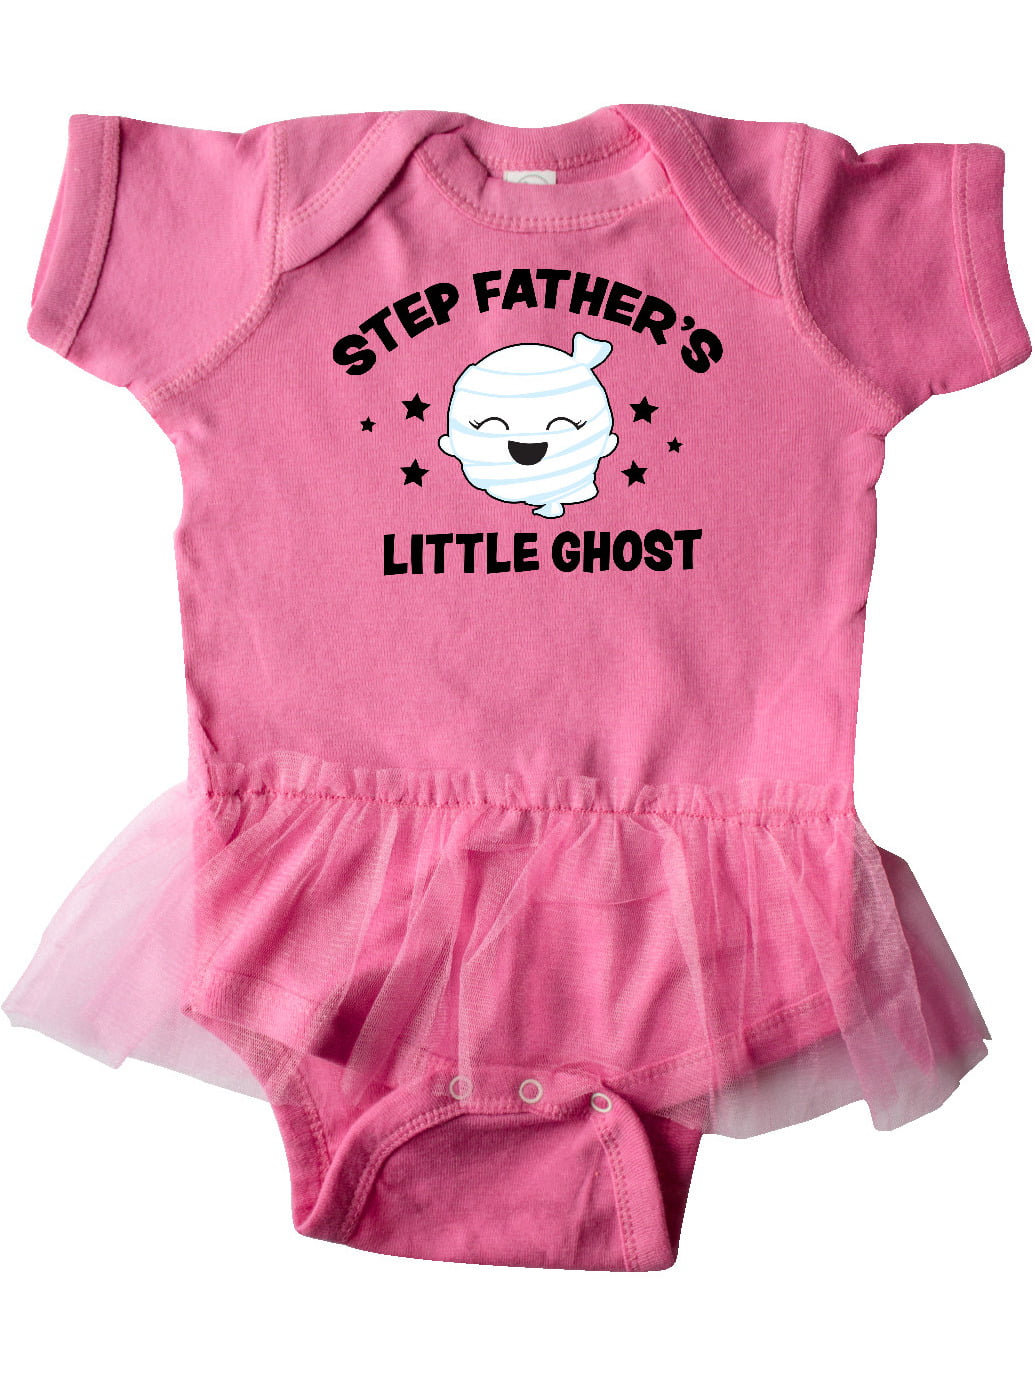 inktastic Cute Step Fathers Little Ghost with Stars Infant Tutu Bodysuit